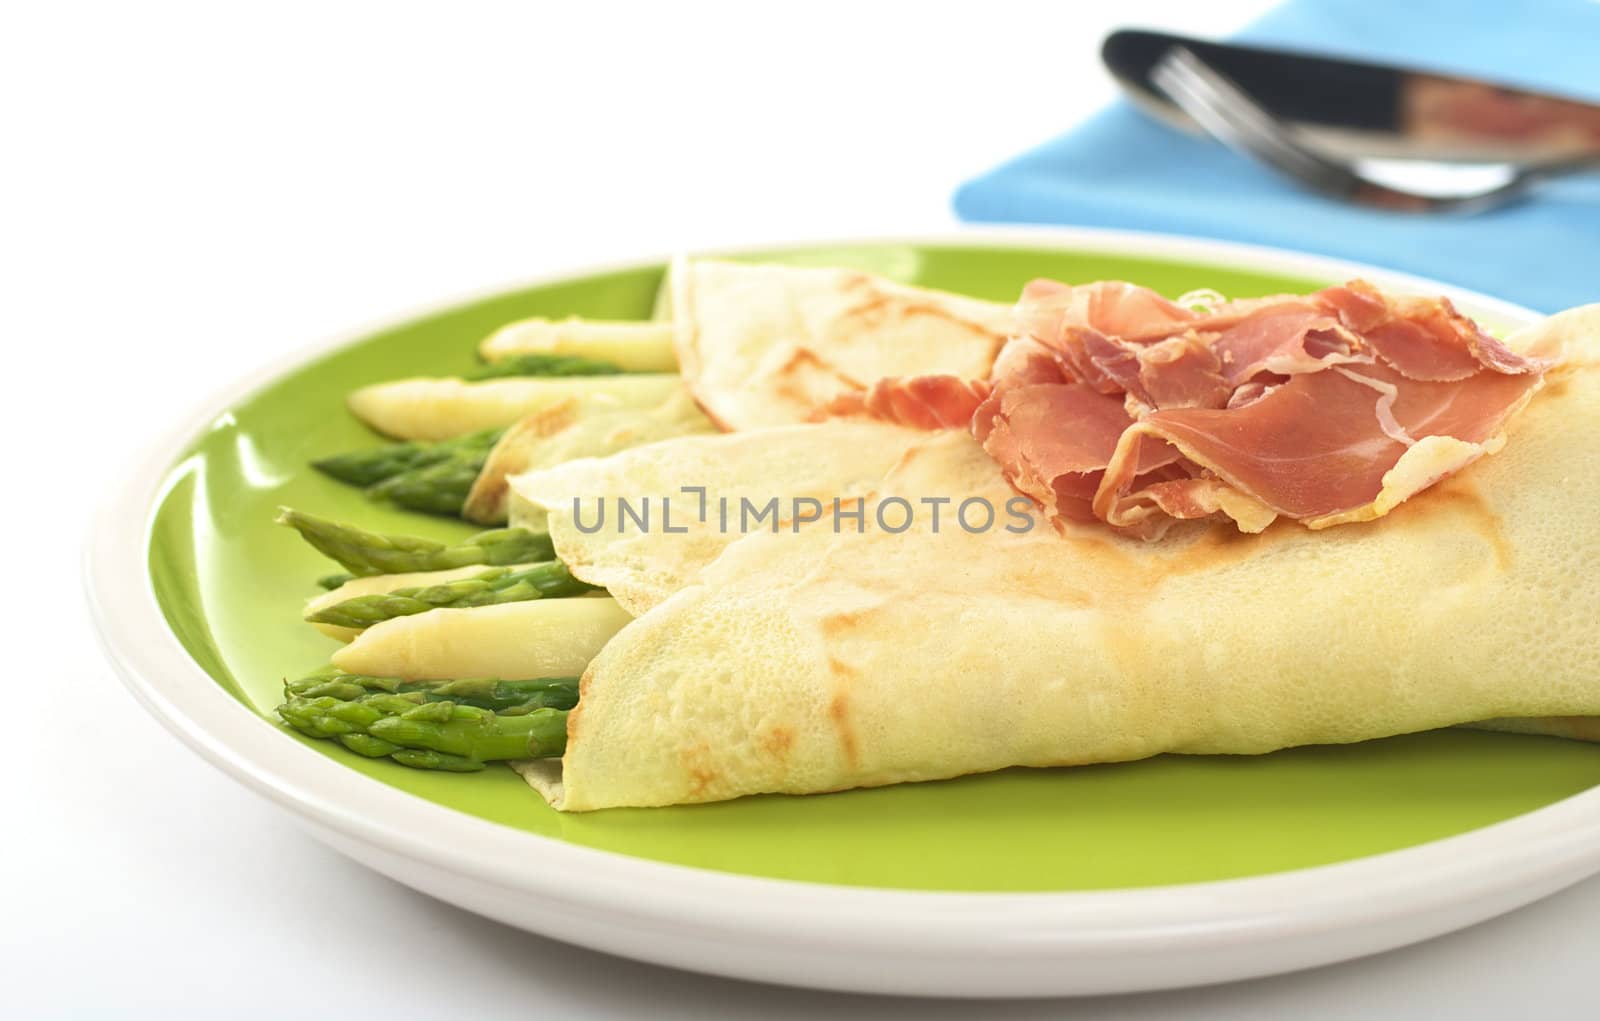 Green and white asparagus wrapped in crepes with ham as garnish on top (Selective Focus, Focus on the asparagus in the front and part of the ham)